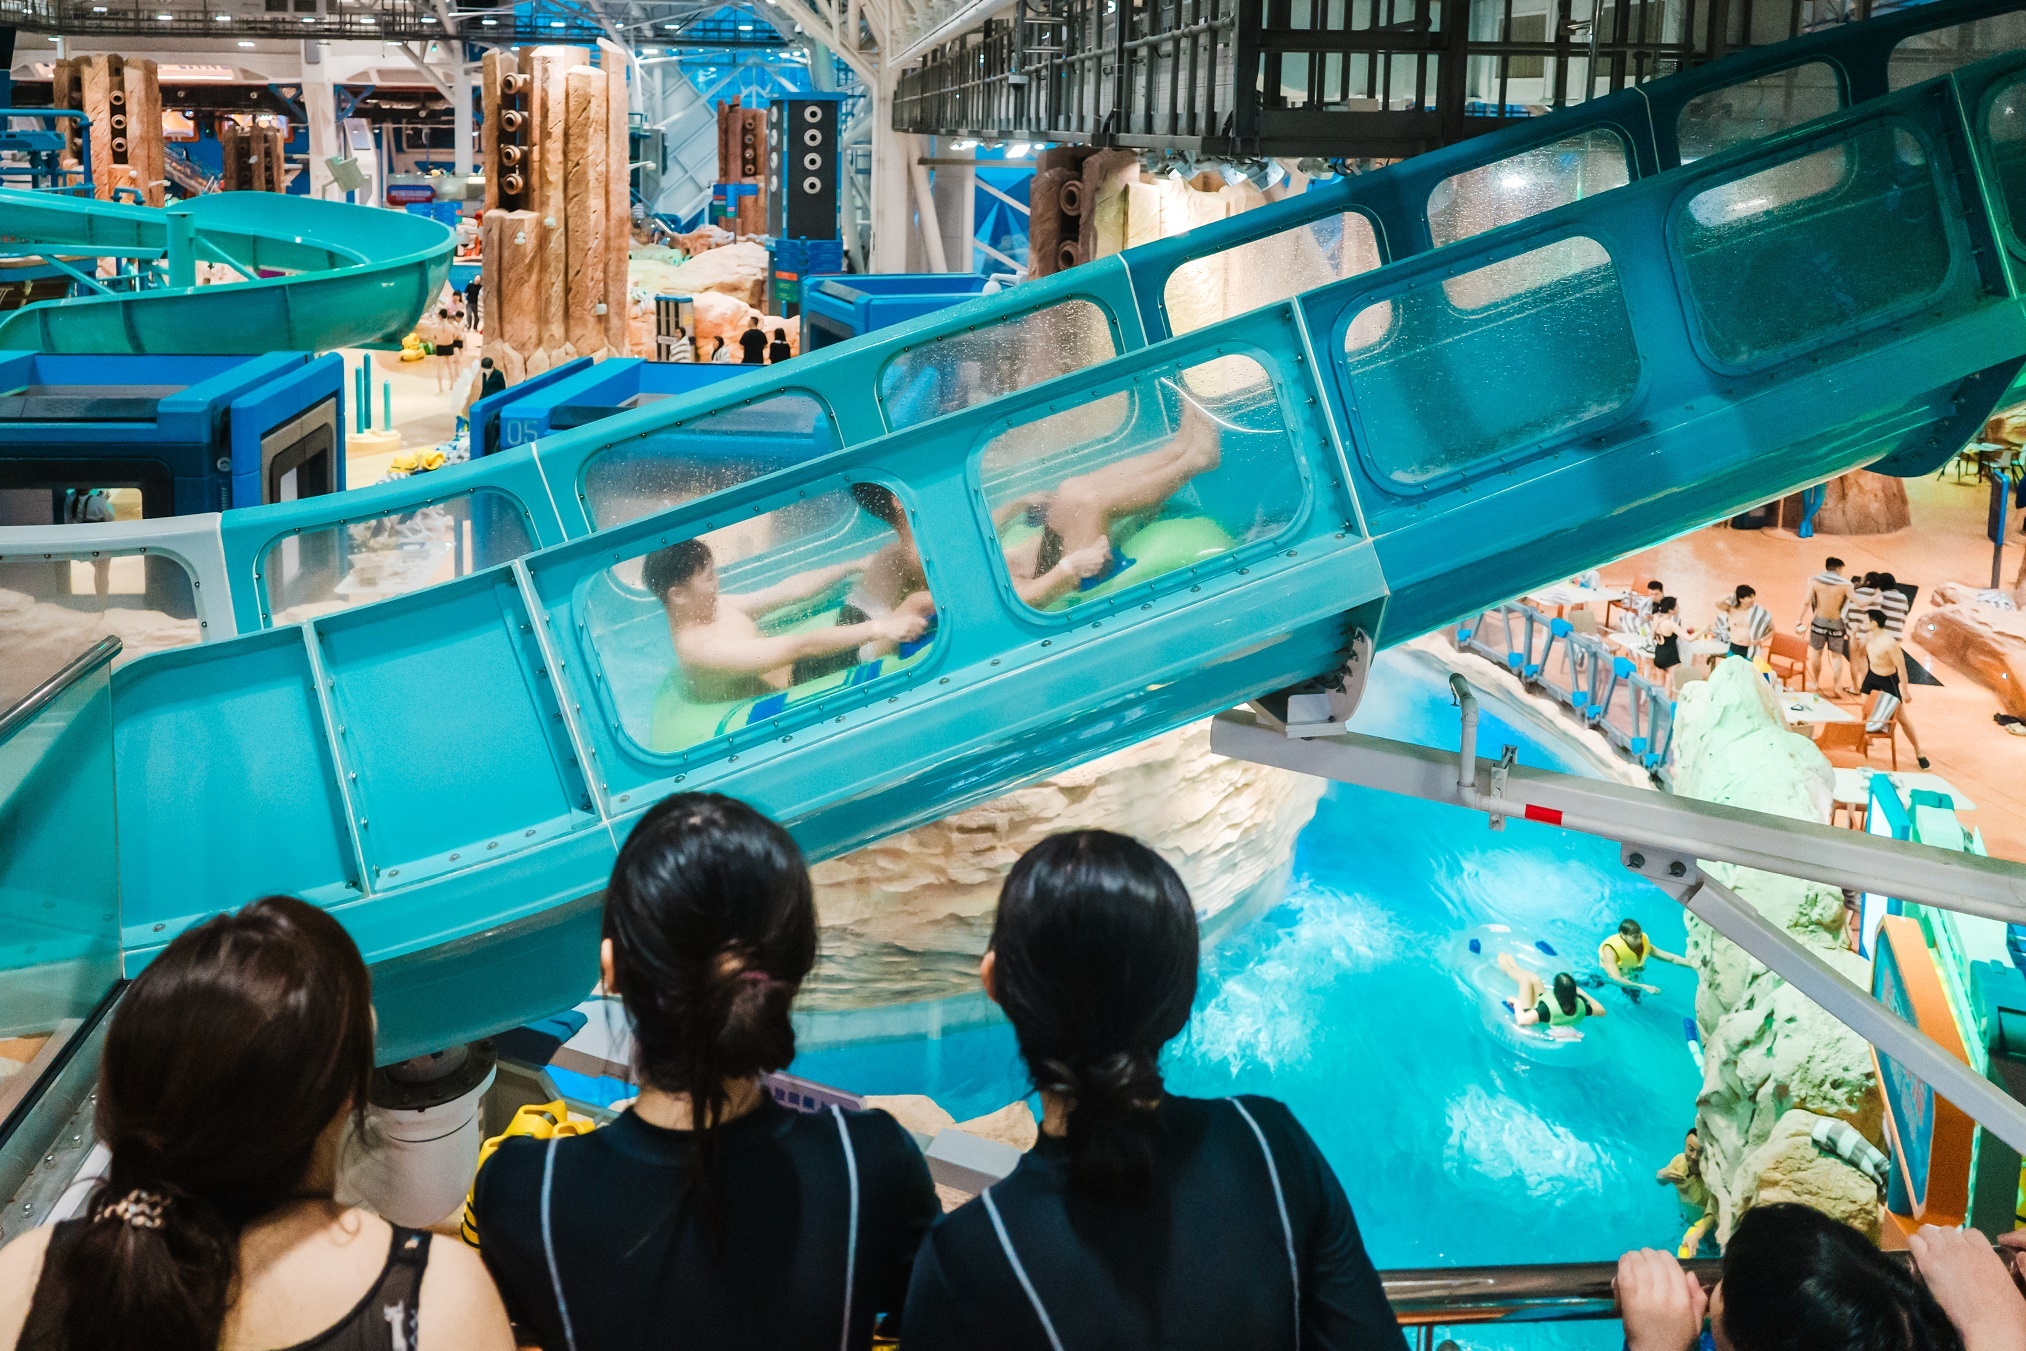 Three women watching riders in an inner tube inside a water coaster